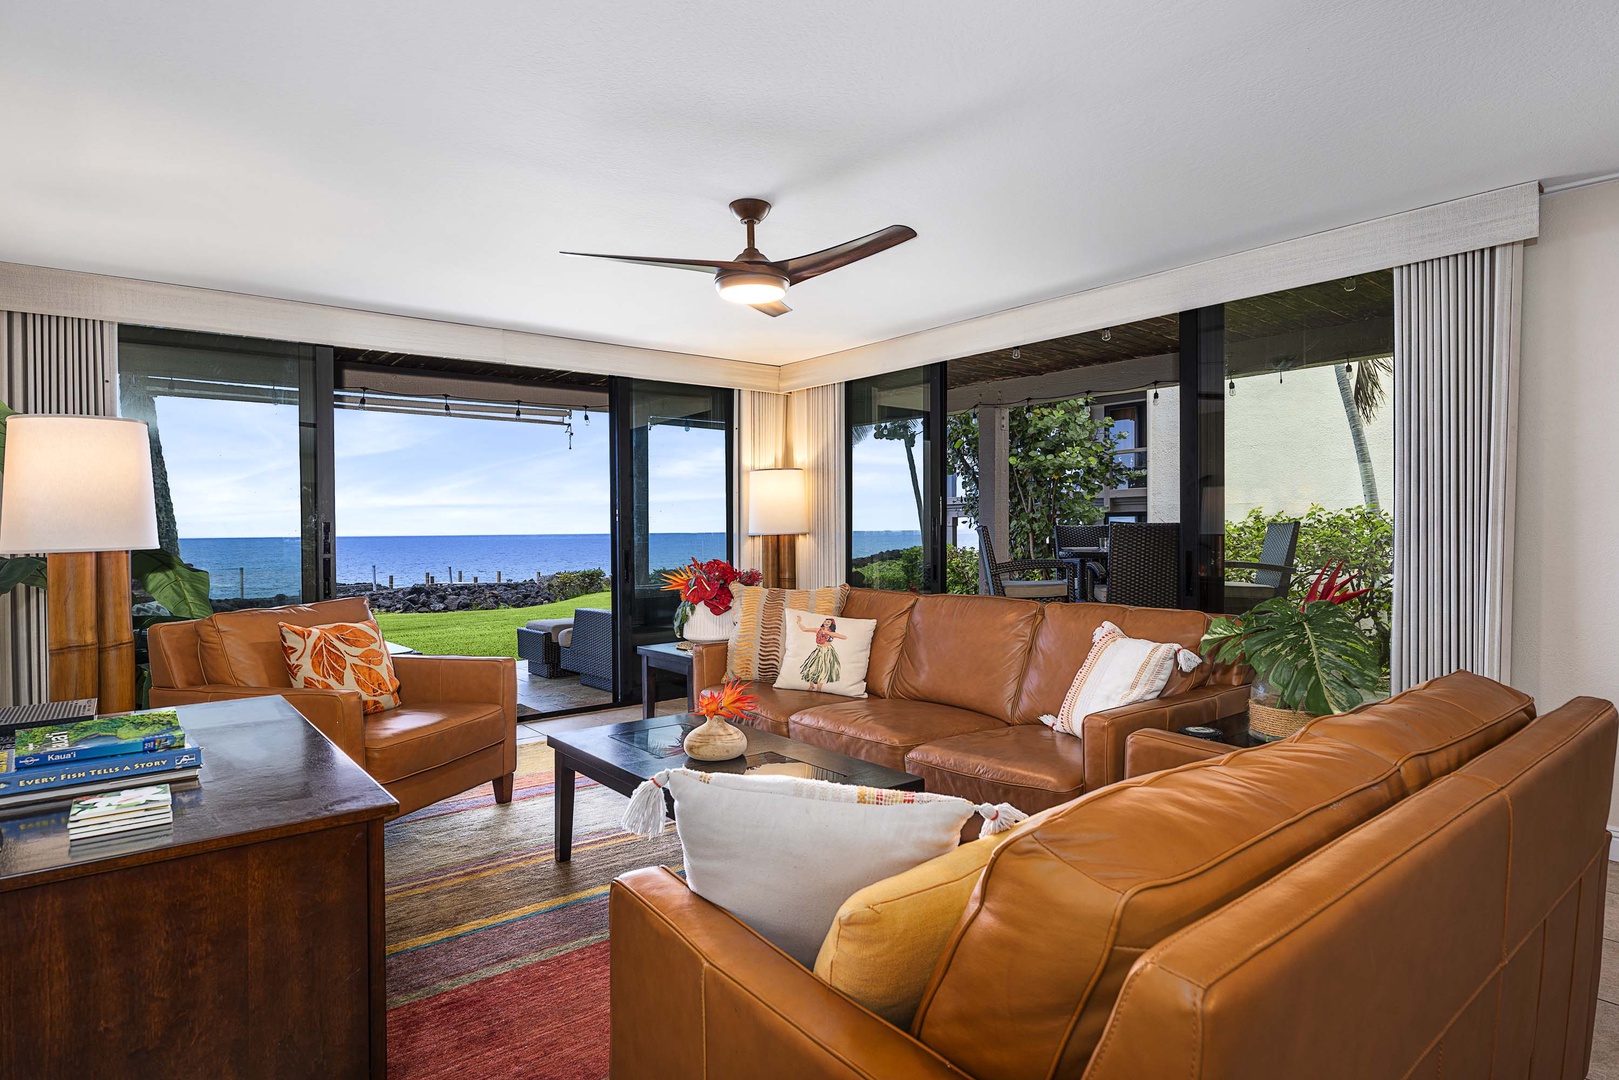 Kailua Kona Vacation Rentals, Keauhou Kona Surf & Racquet 2101 - Be greeted with an open living area. Spacious and airy interiors framed by sleek glass walls and sliders.